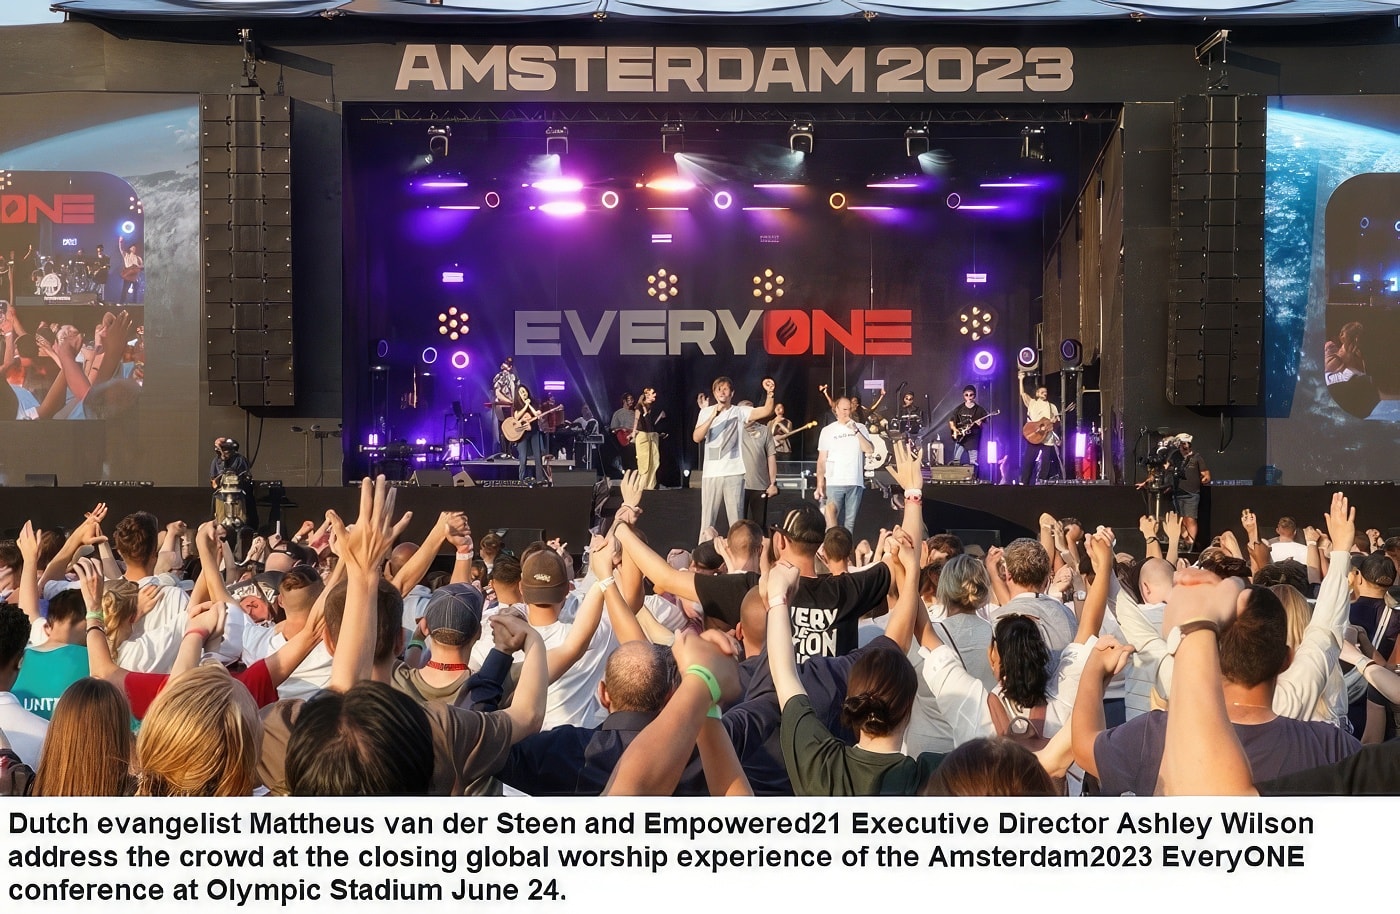 The Amsterdam2023 EveryONE conference concluded with a global worship, prayer and commissioning service for the thousands who gathered.